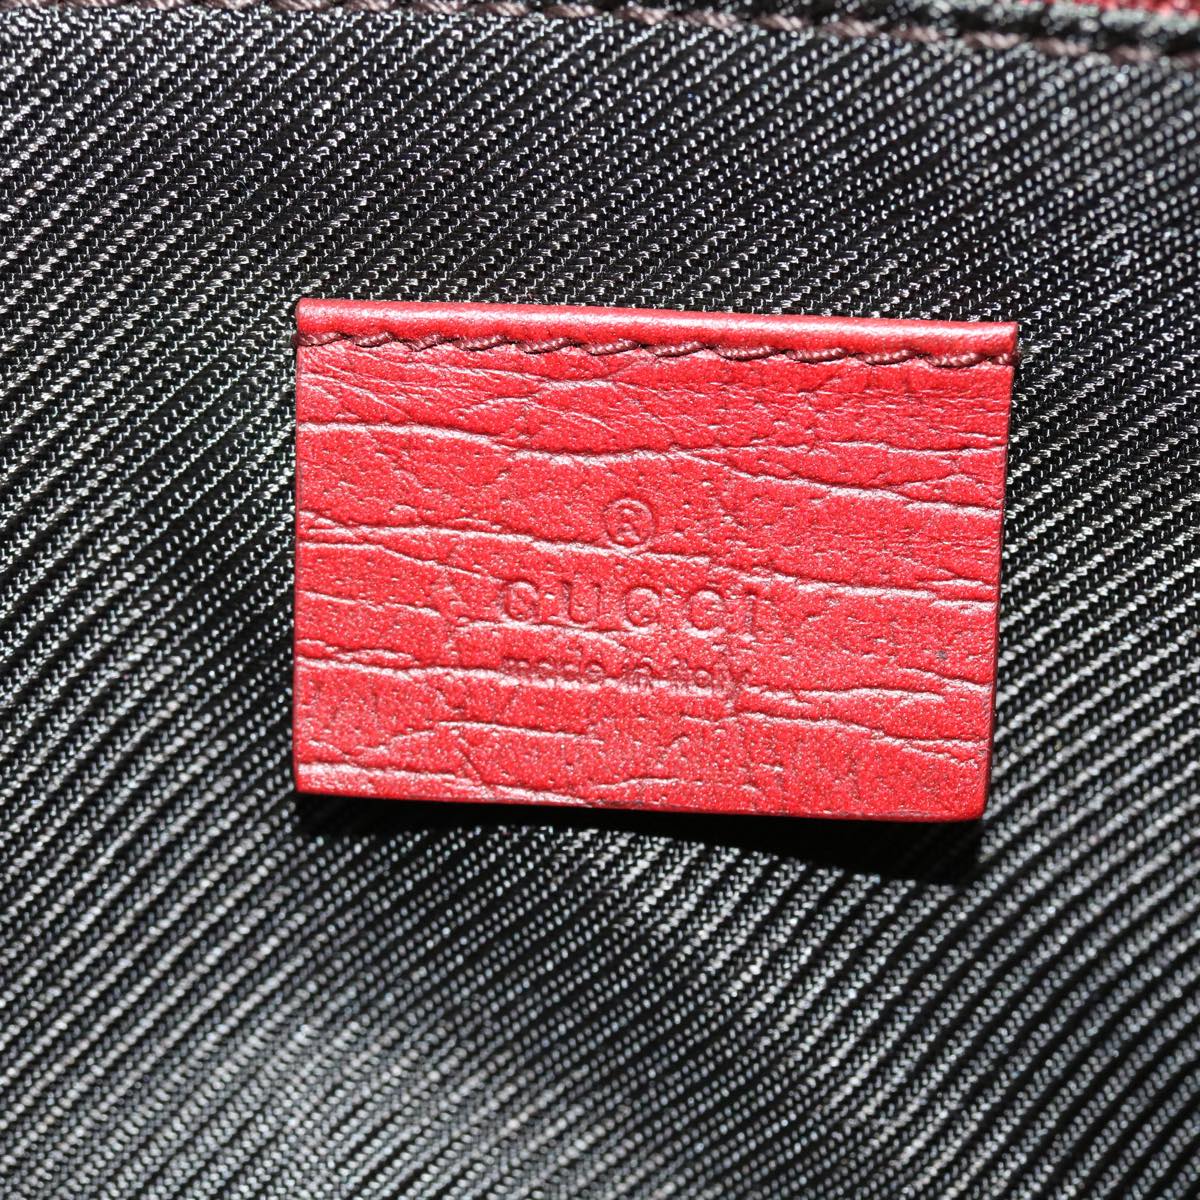 GUCCI GG Canvas Accessory Pouch Red 07198 Auth am3657